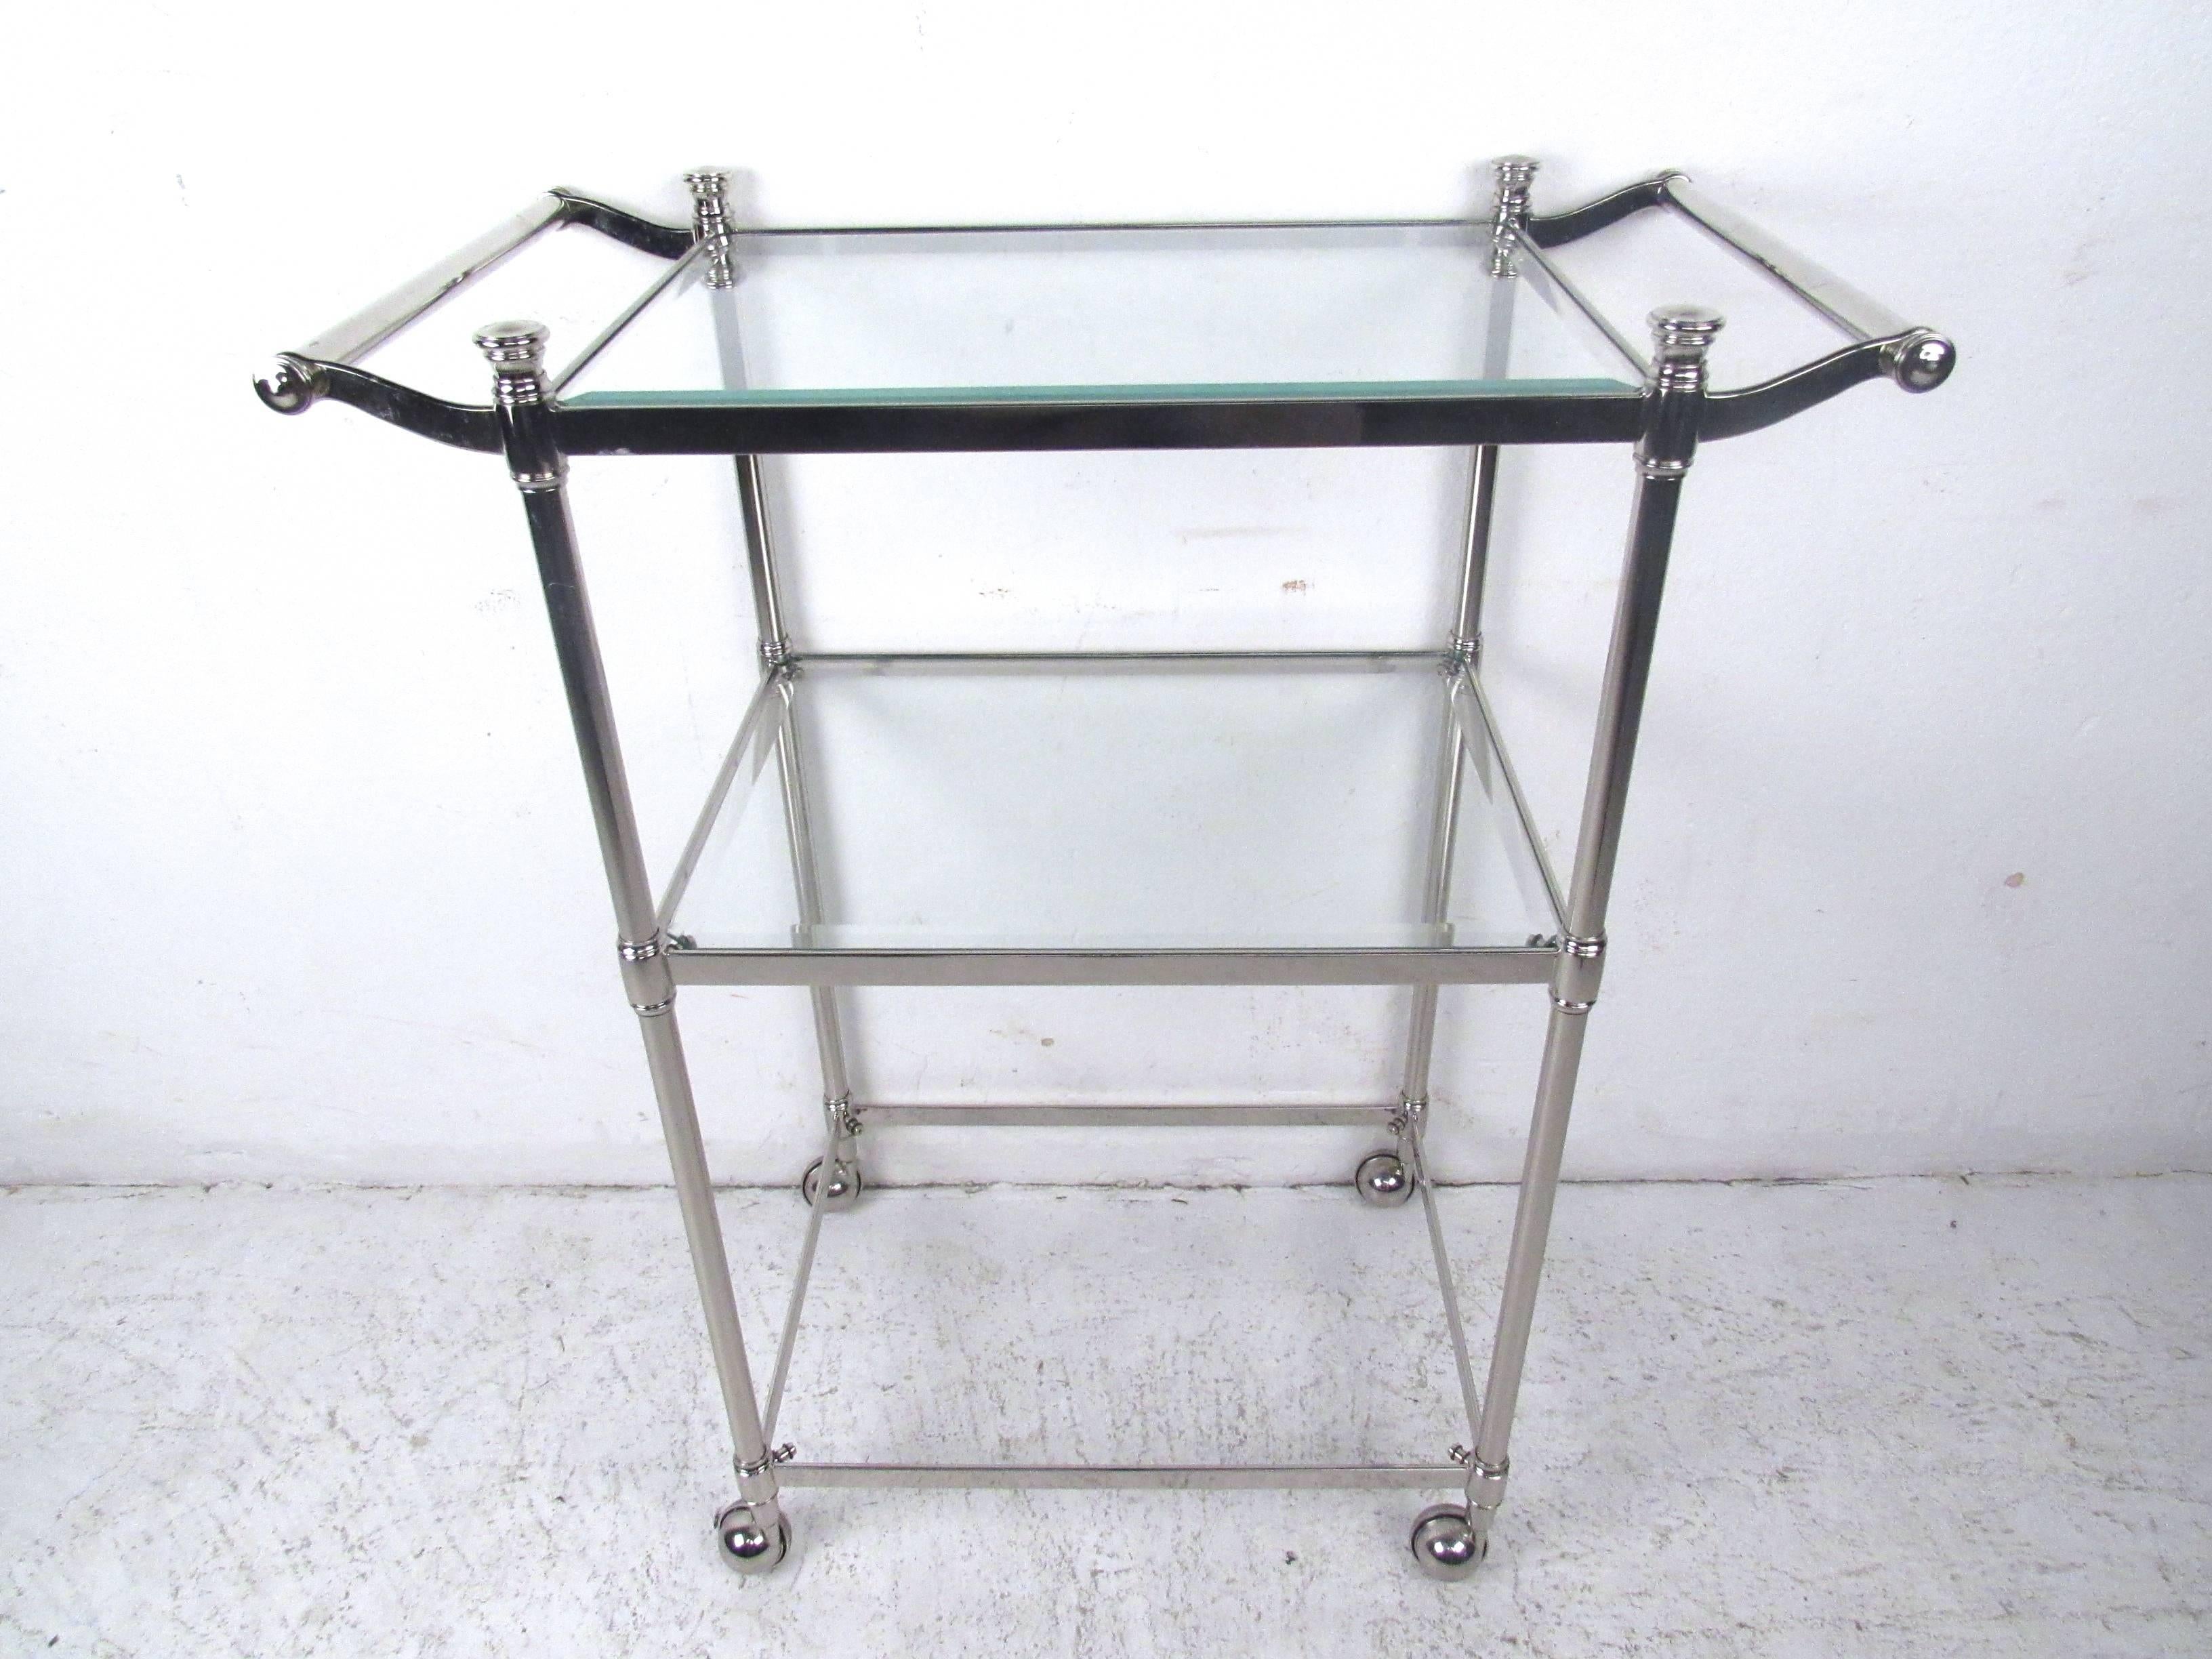 This stylish vintage rolling cart features heavy chrome construction with multiple shelves for storage and serving. Unique detailed trim, casters and double-sided handles make for easy use. Please confirm item location (NY or NJ).